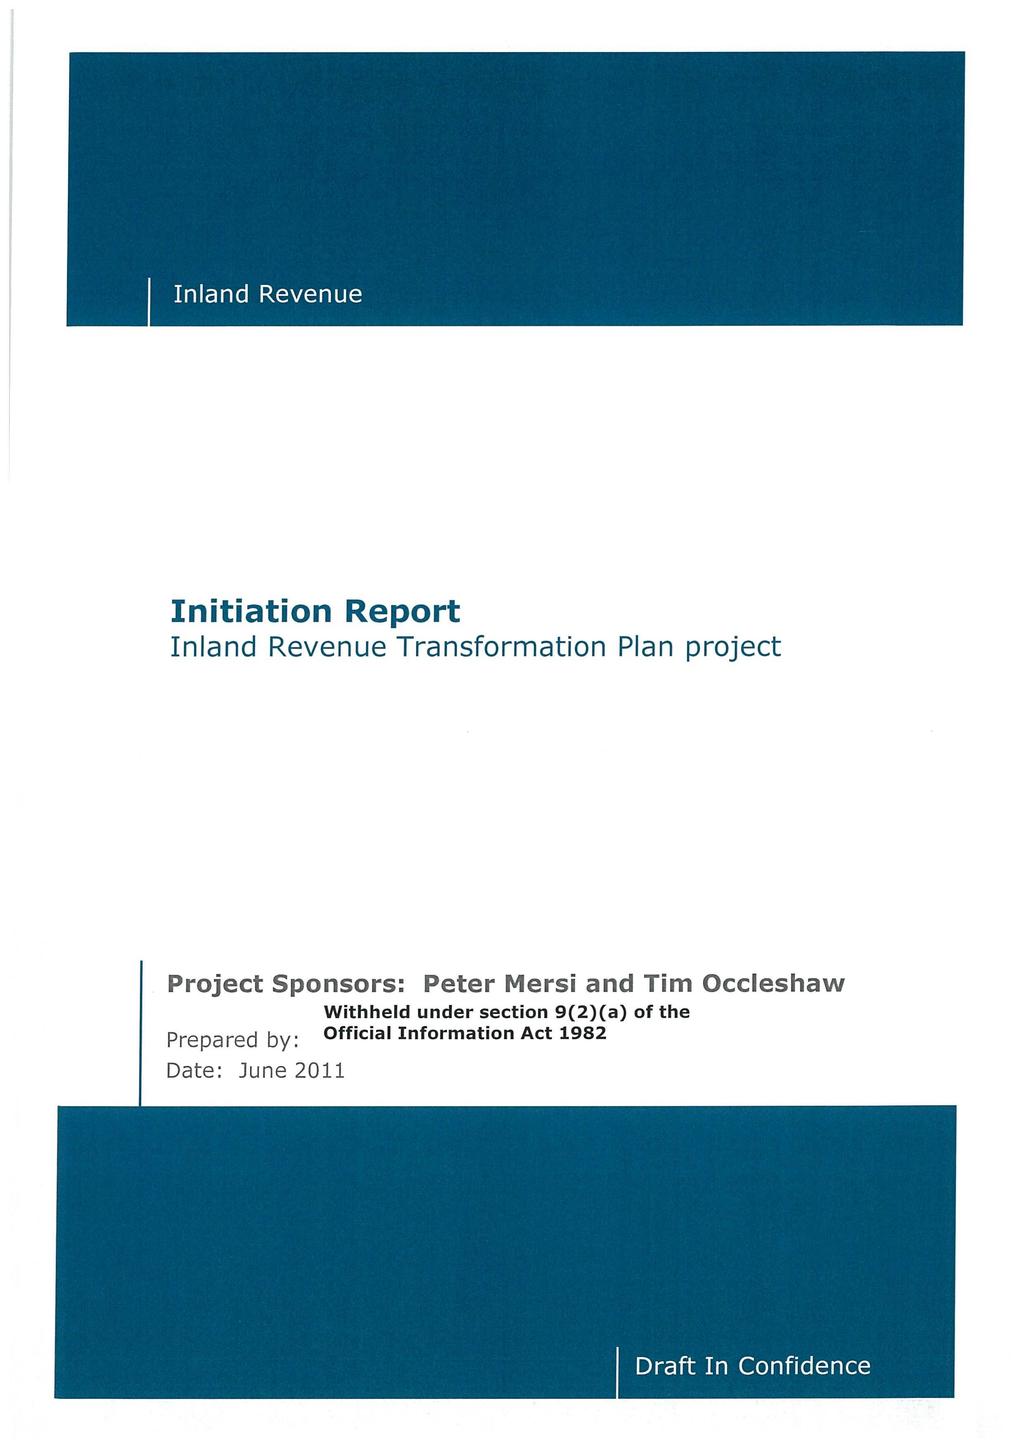 Inland Revenue Plan project Project Sponsors: Peter Mersi and Tim Occleshaw Withheld under